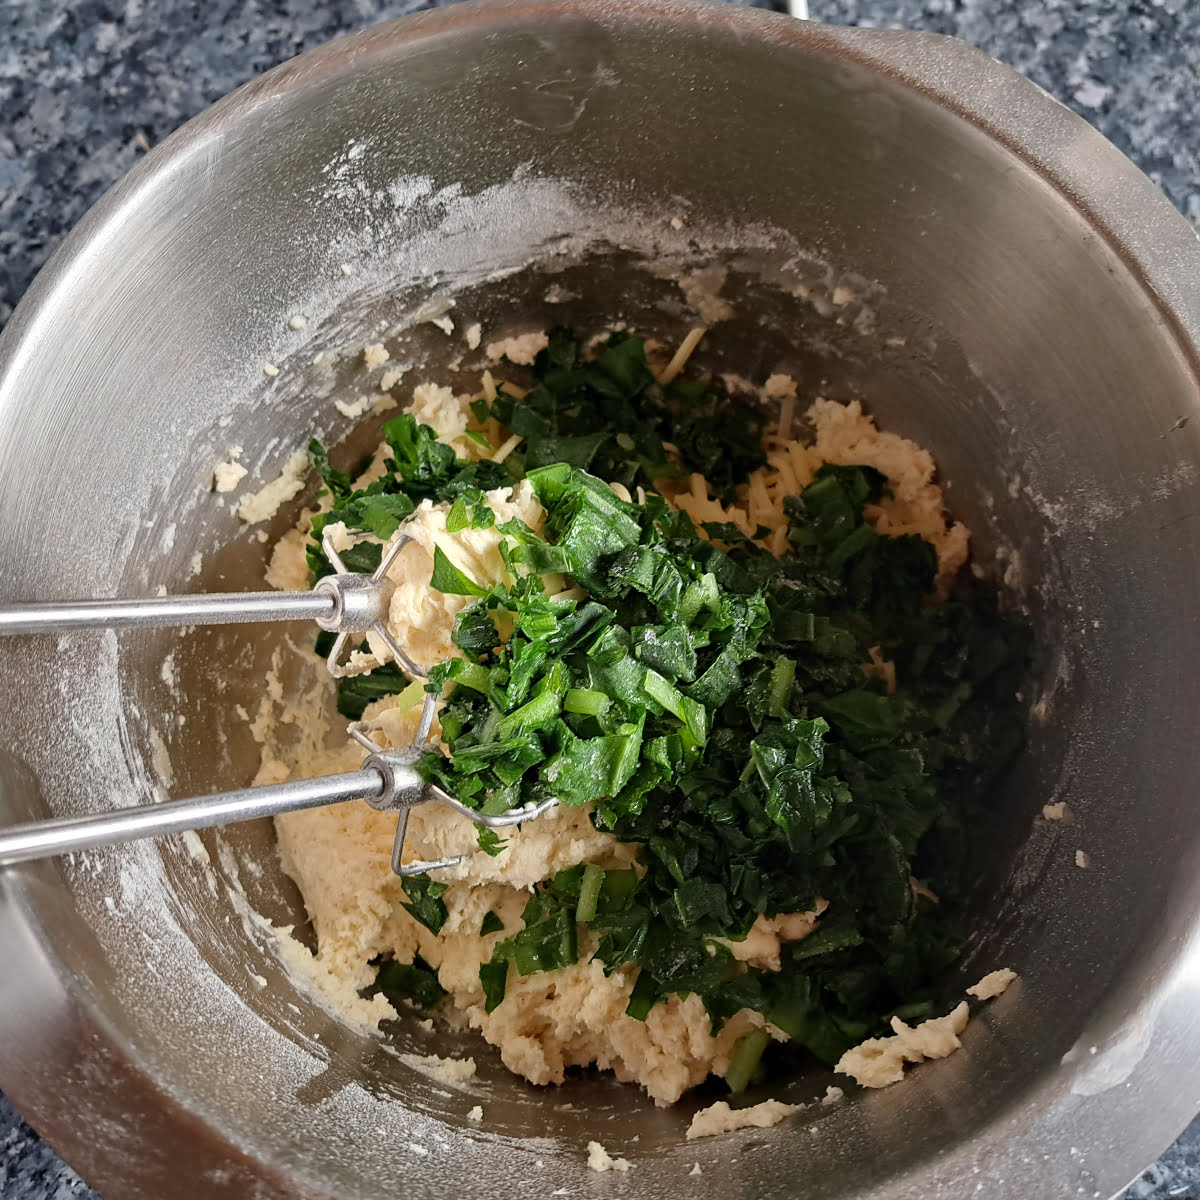 How to make no yeast dough for wild garlic bread.